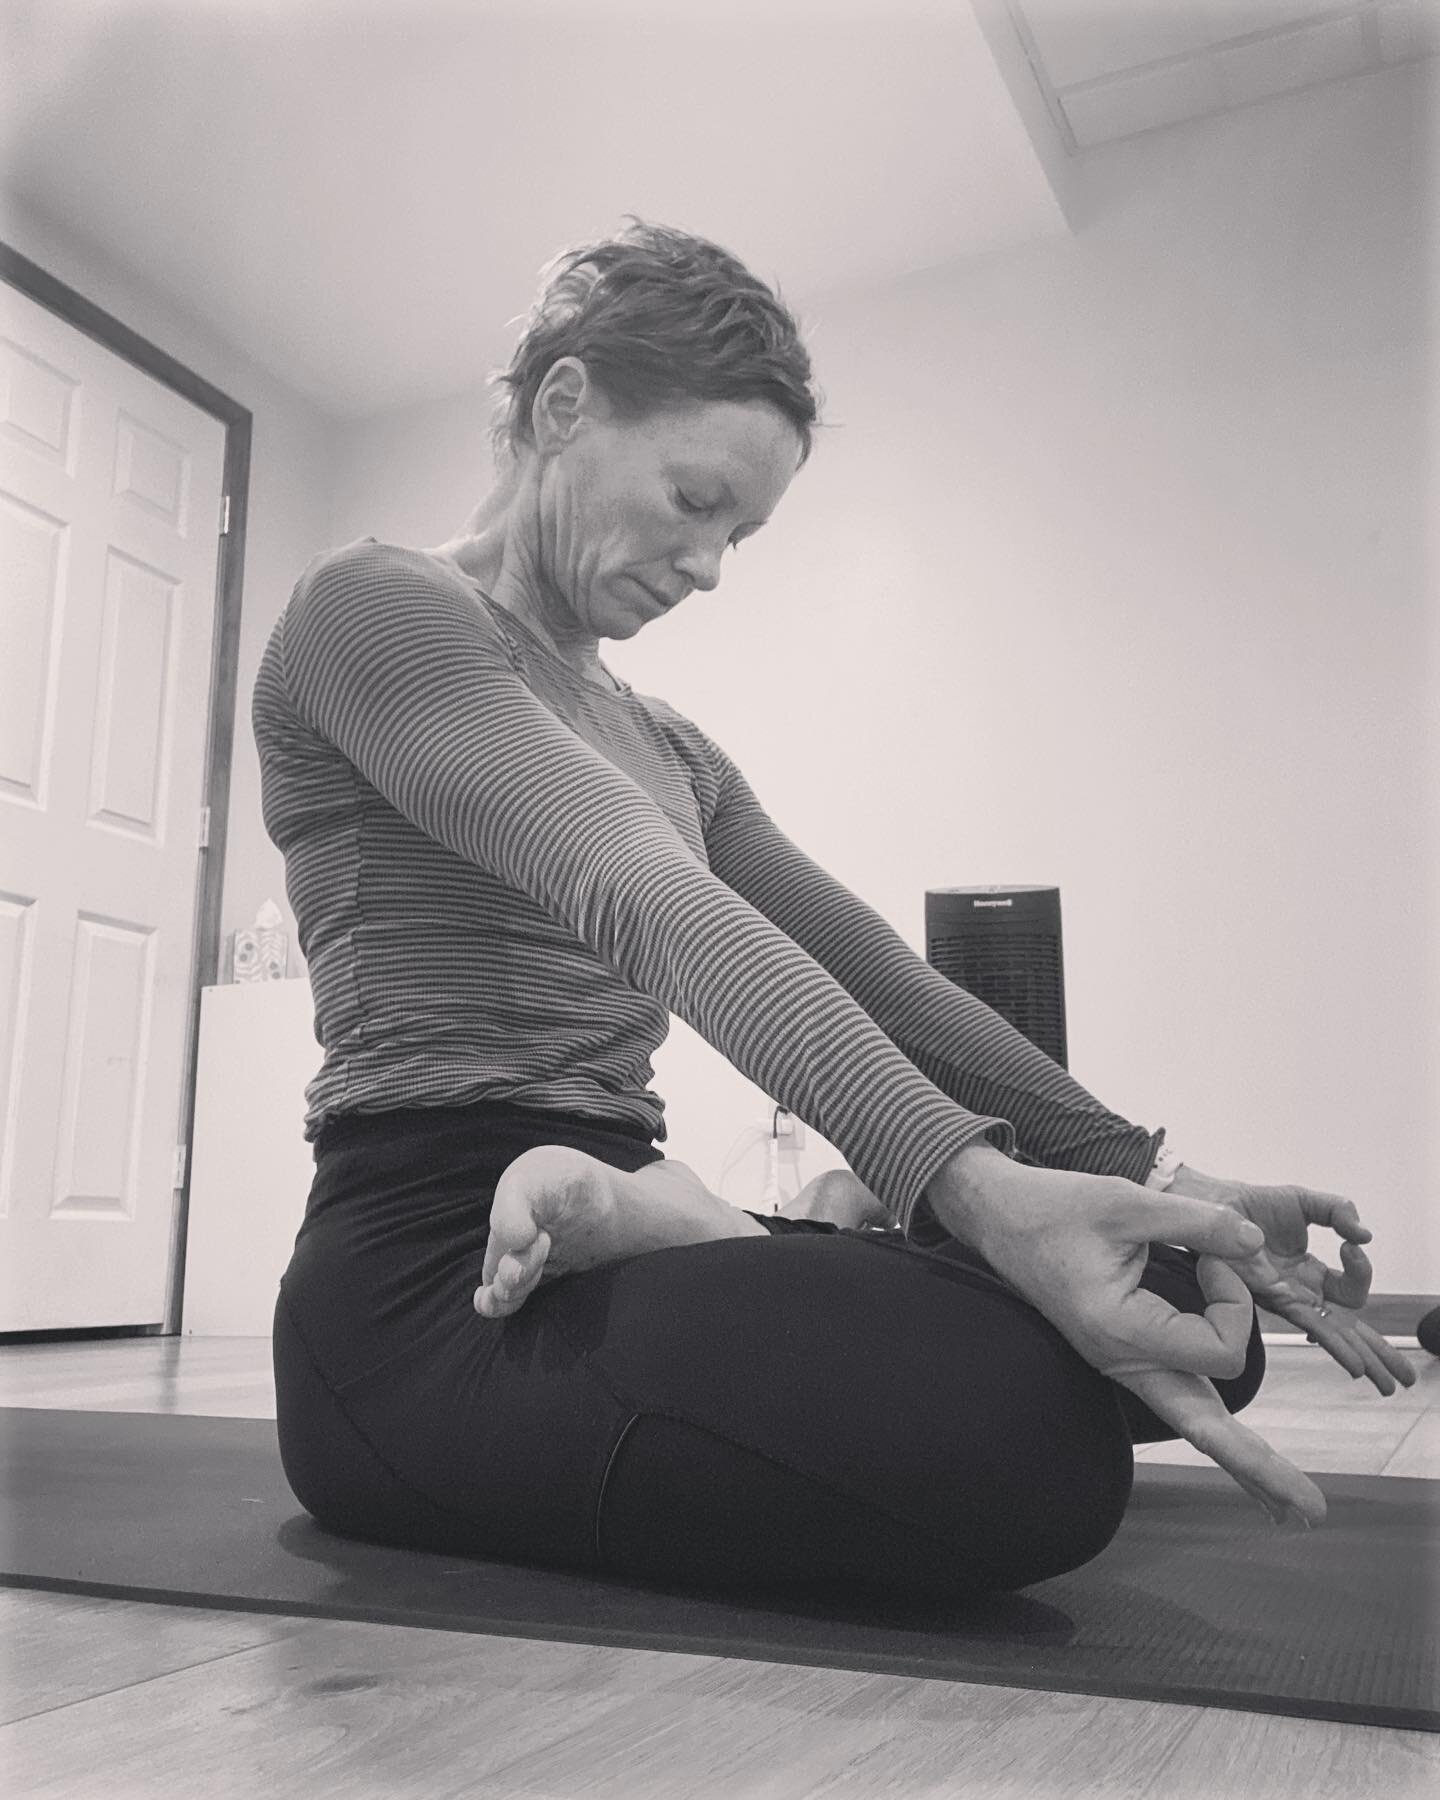 Try not to get too attached to all of the flashy asanas in your practice. Remember, we are here to learn to rest in the stillness.
#ashtangayoga #yogateacher #bestill #roadkillyoga #breathe #dailypractice